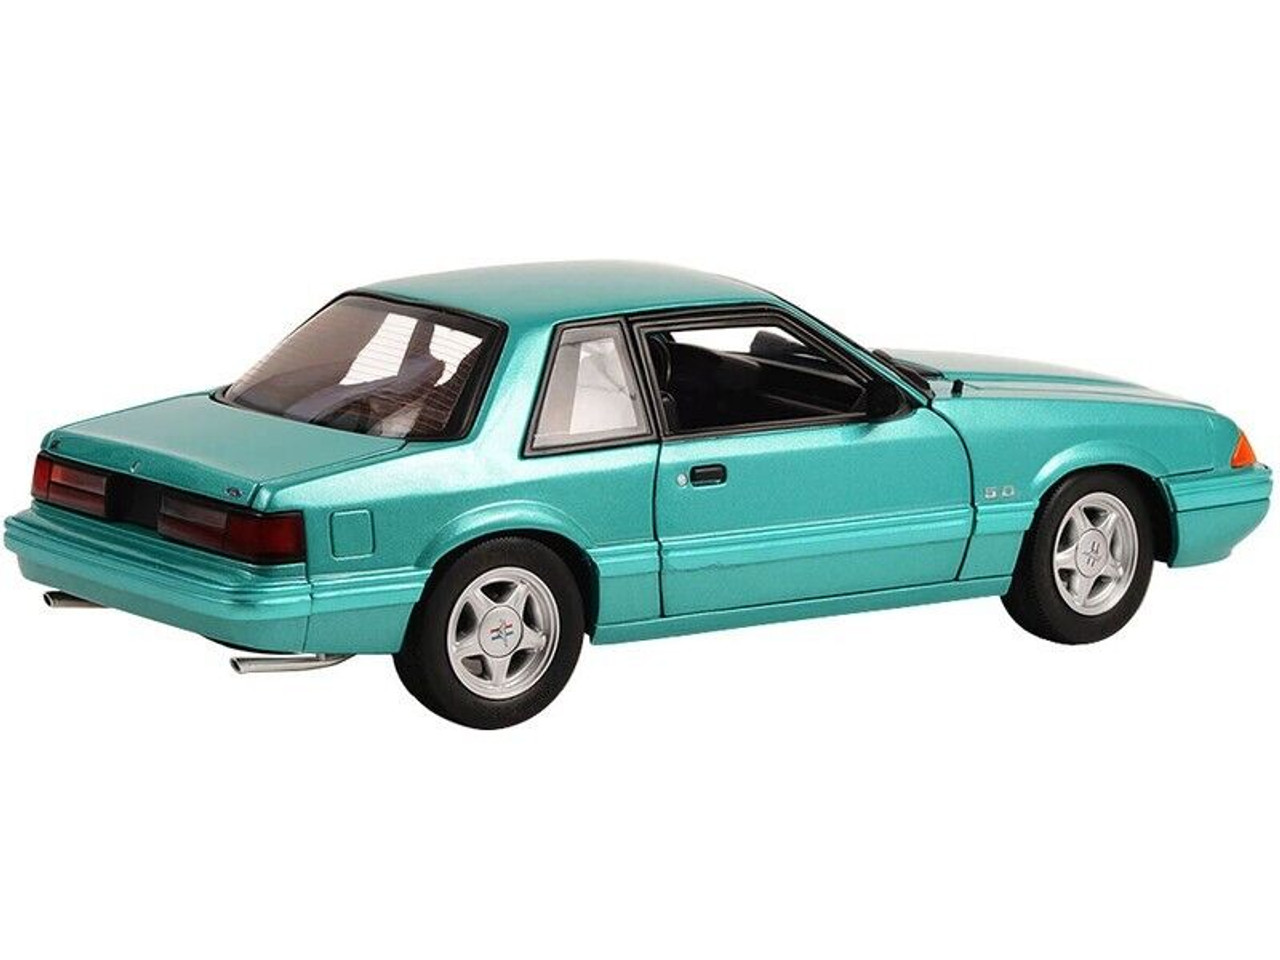 1/18 GMP 1993 Ford Mustang LX 5.0 (Calypso Green) Diecast Car Model